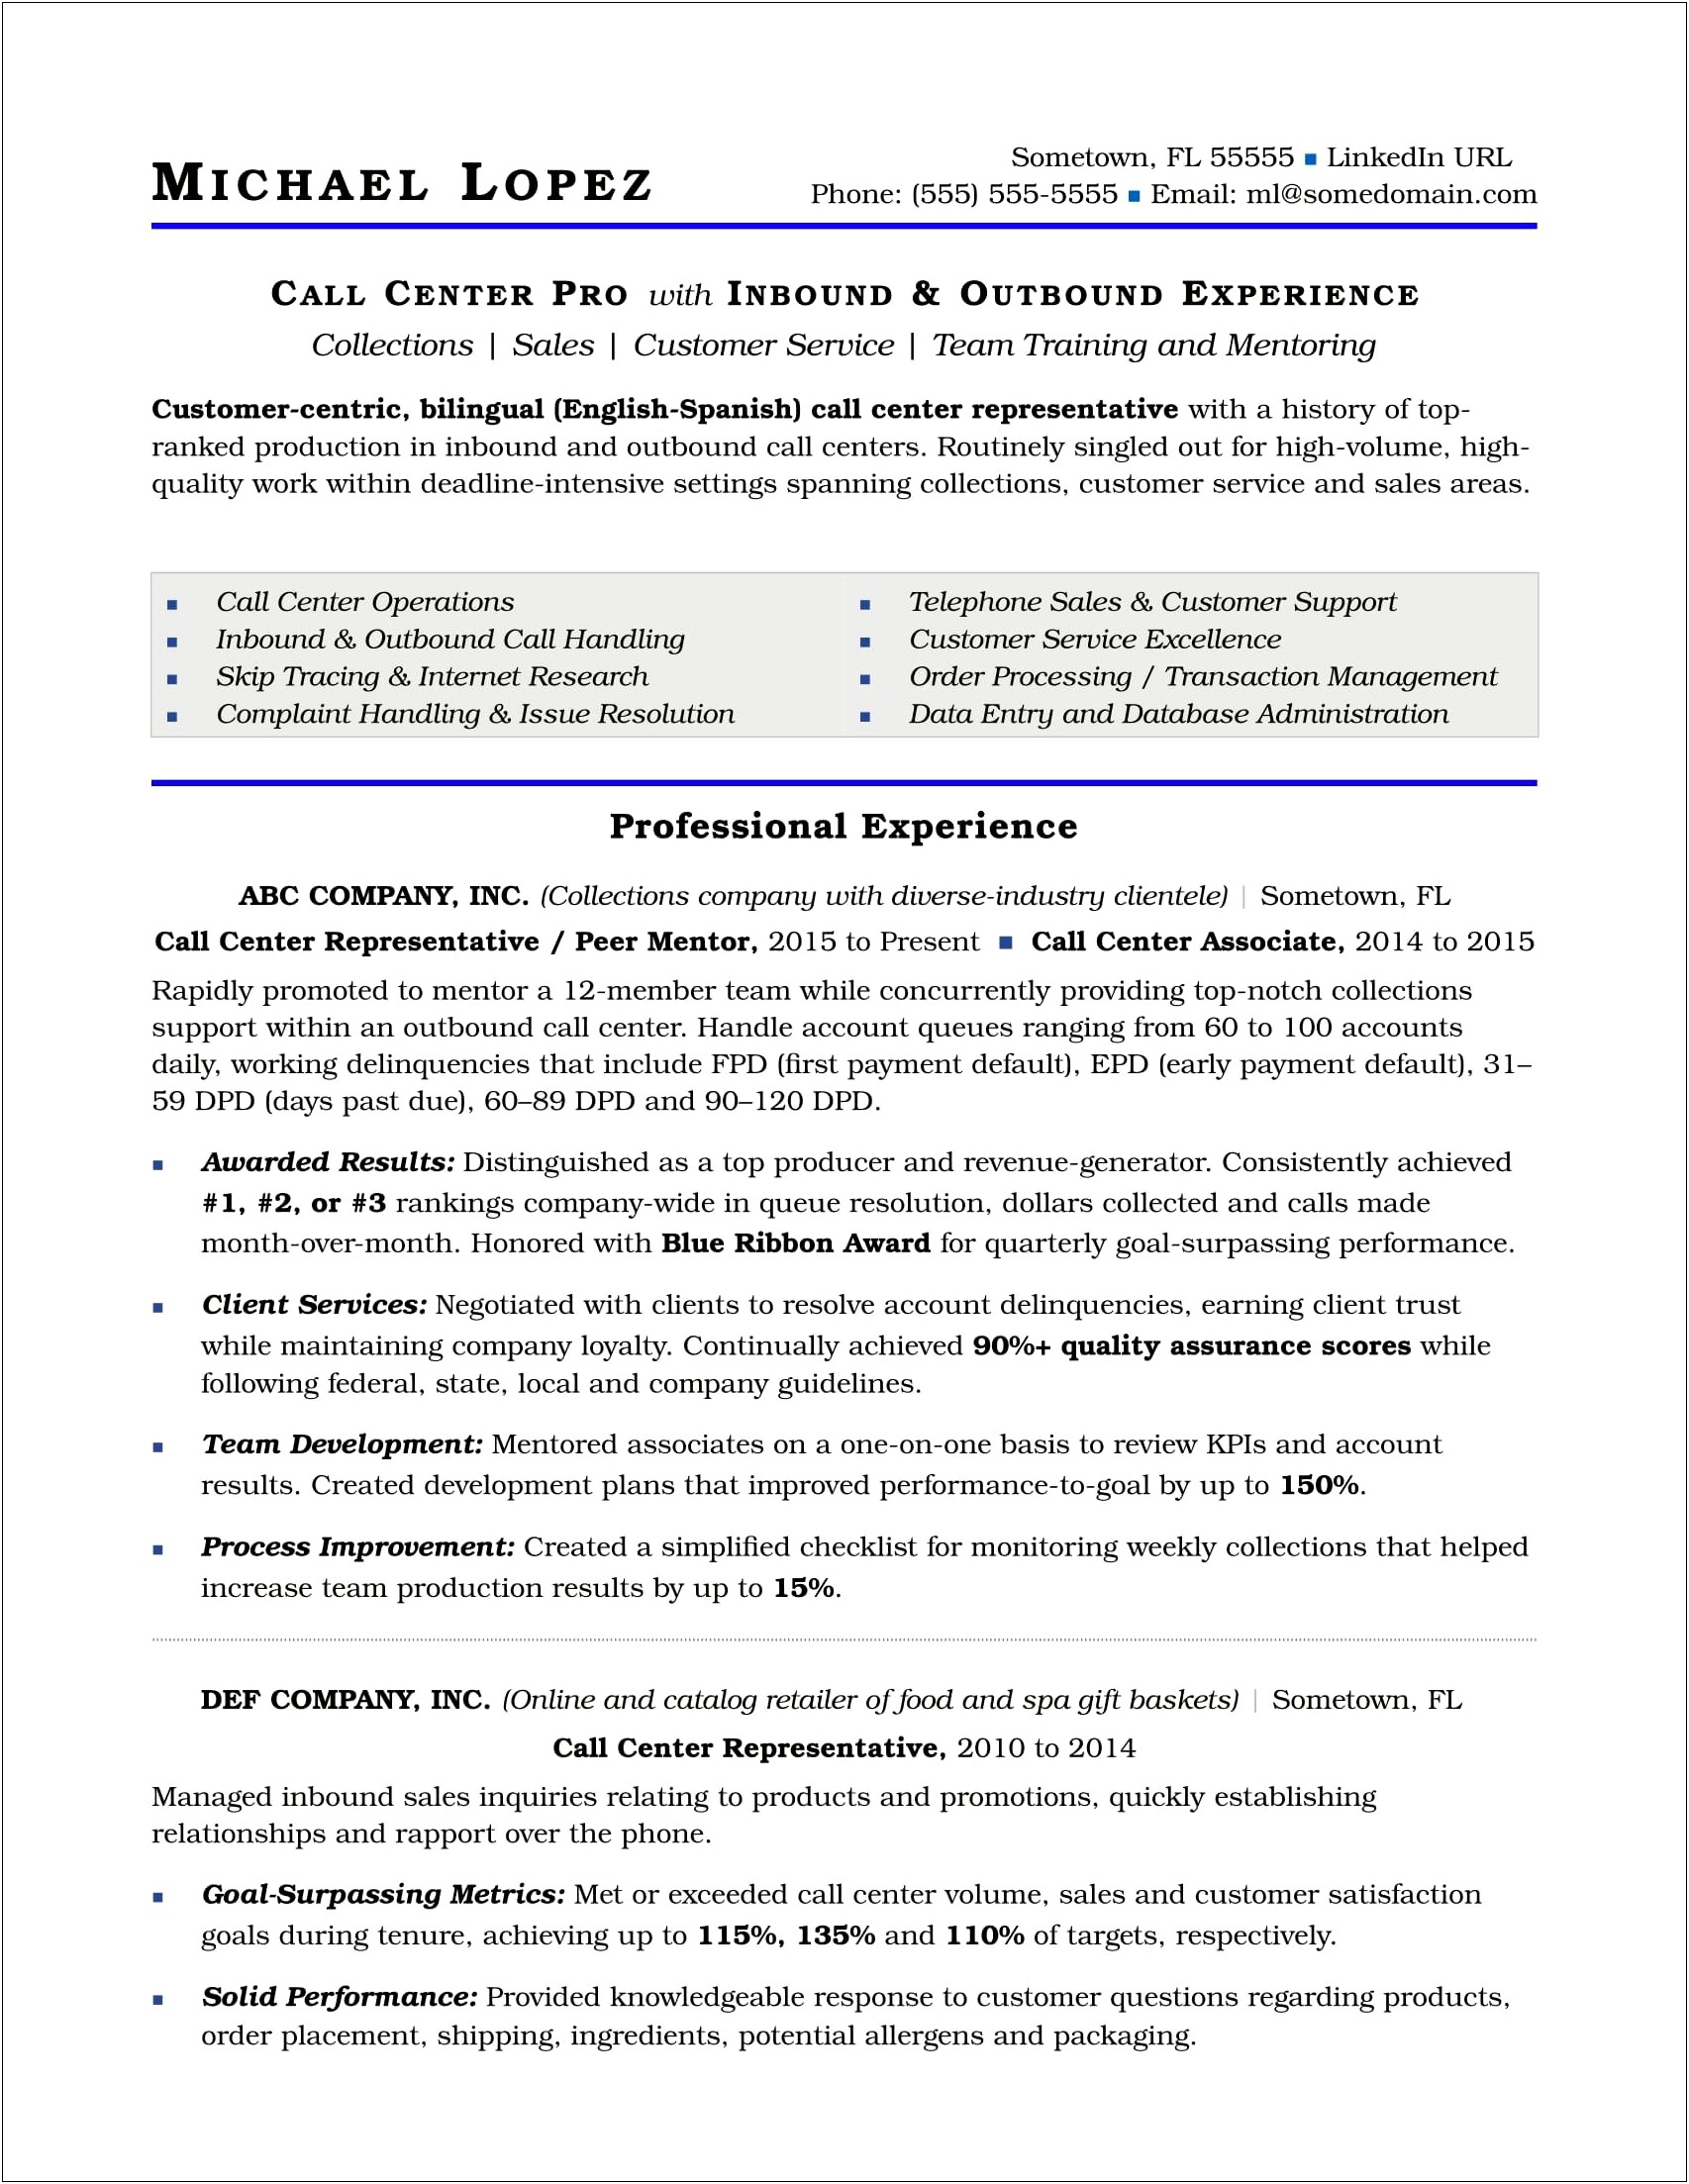 Sample Resume To Get Hired